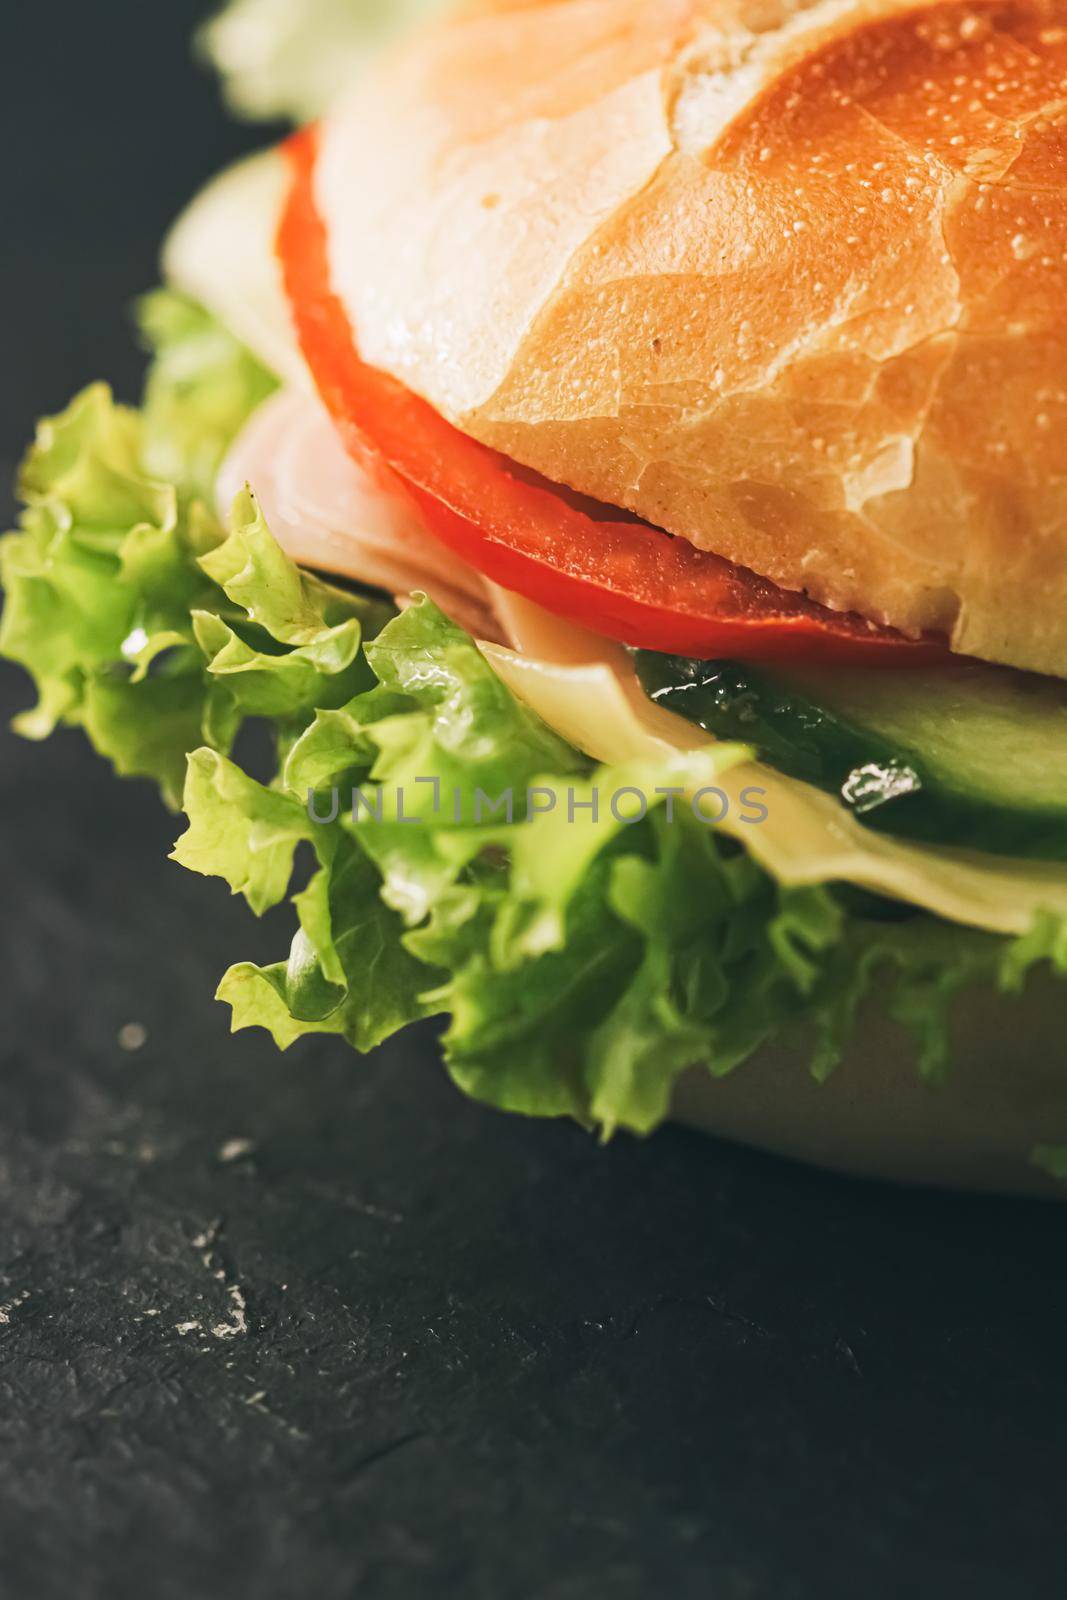 Sandwich with ham, cheese, veggies and lettuce, fast food by Anneleven